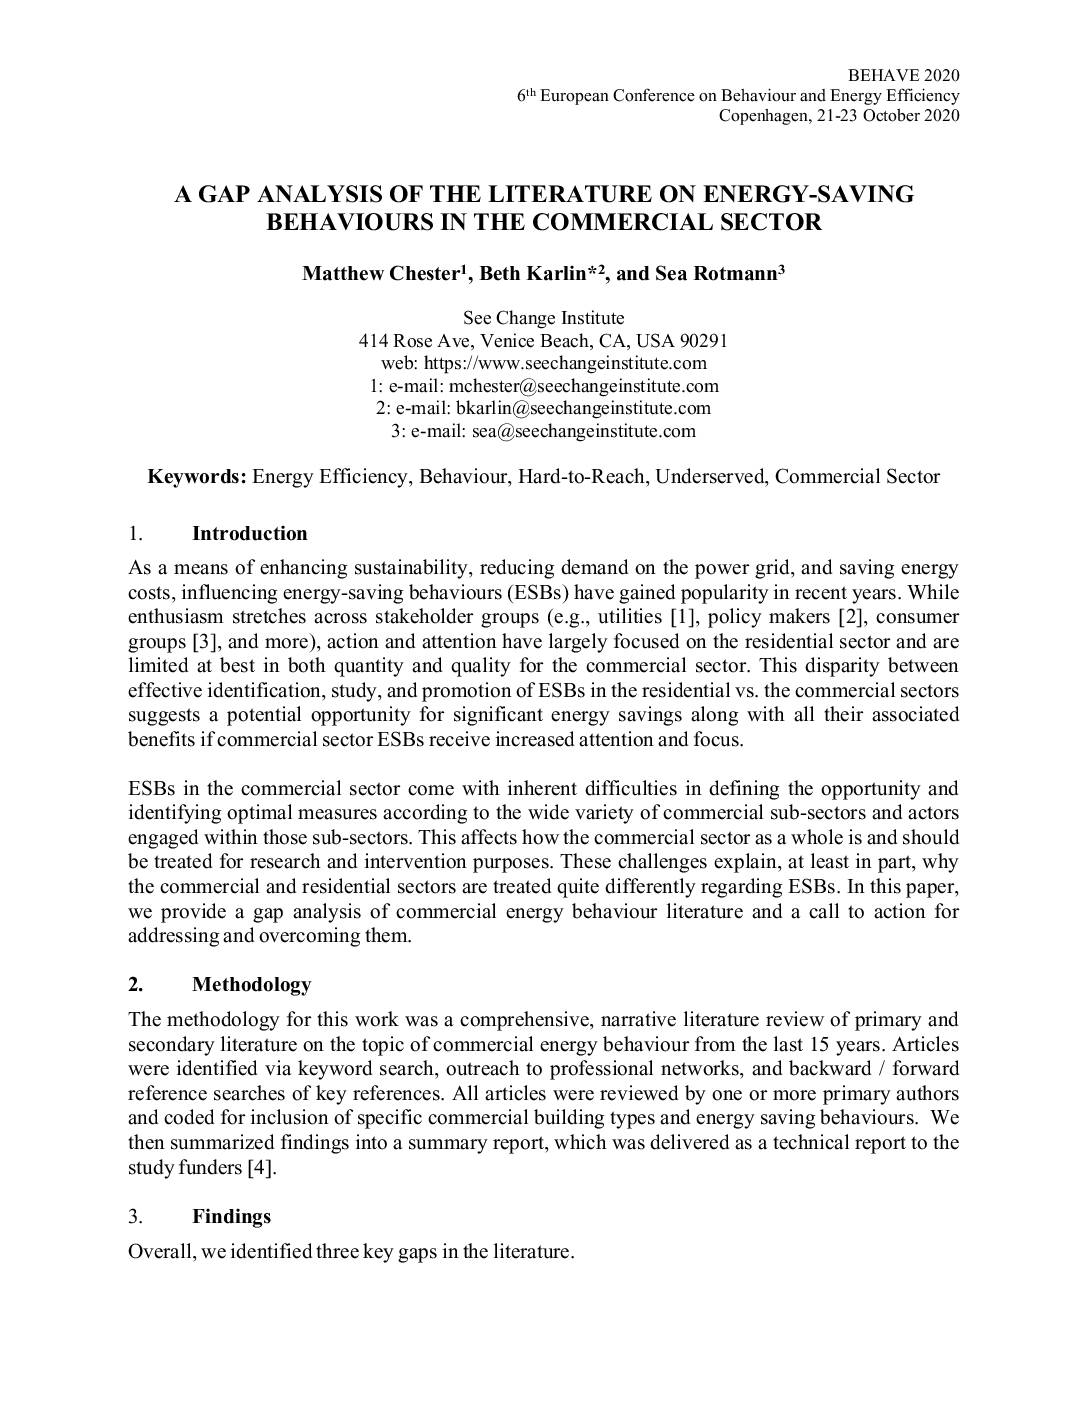 A gap analysis of the literature on energy-saving behaviours in the commercial sector